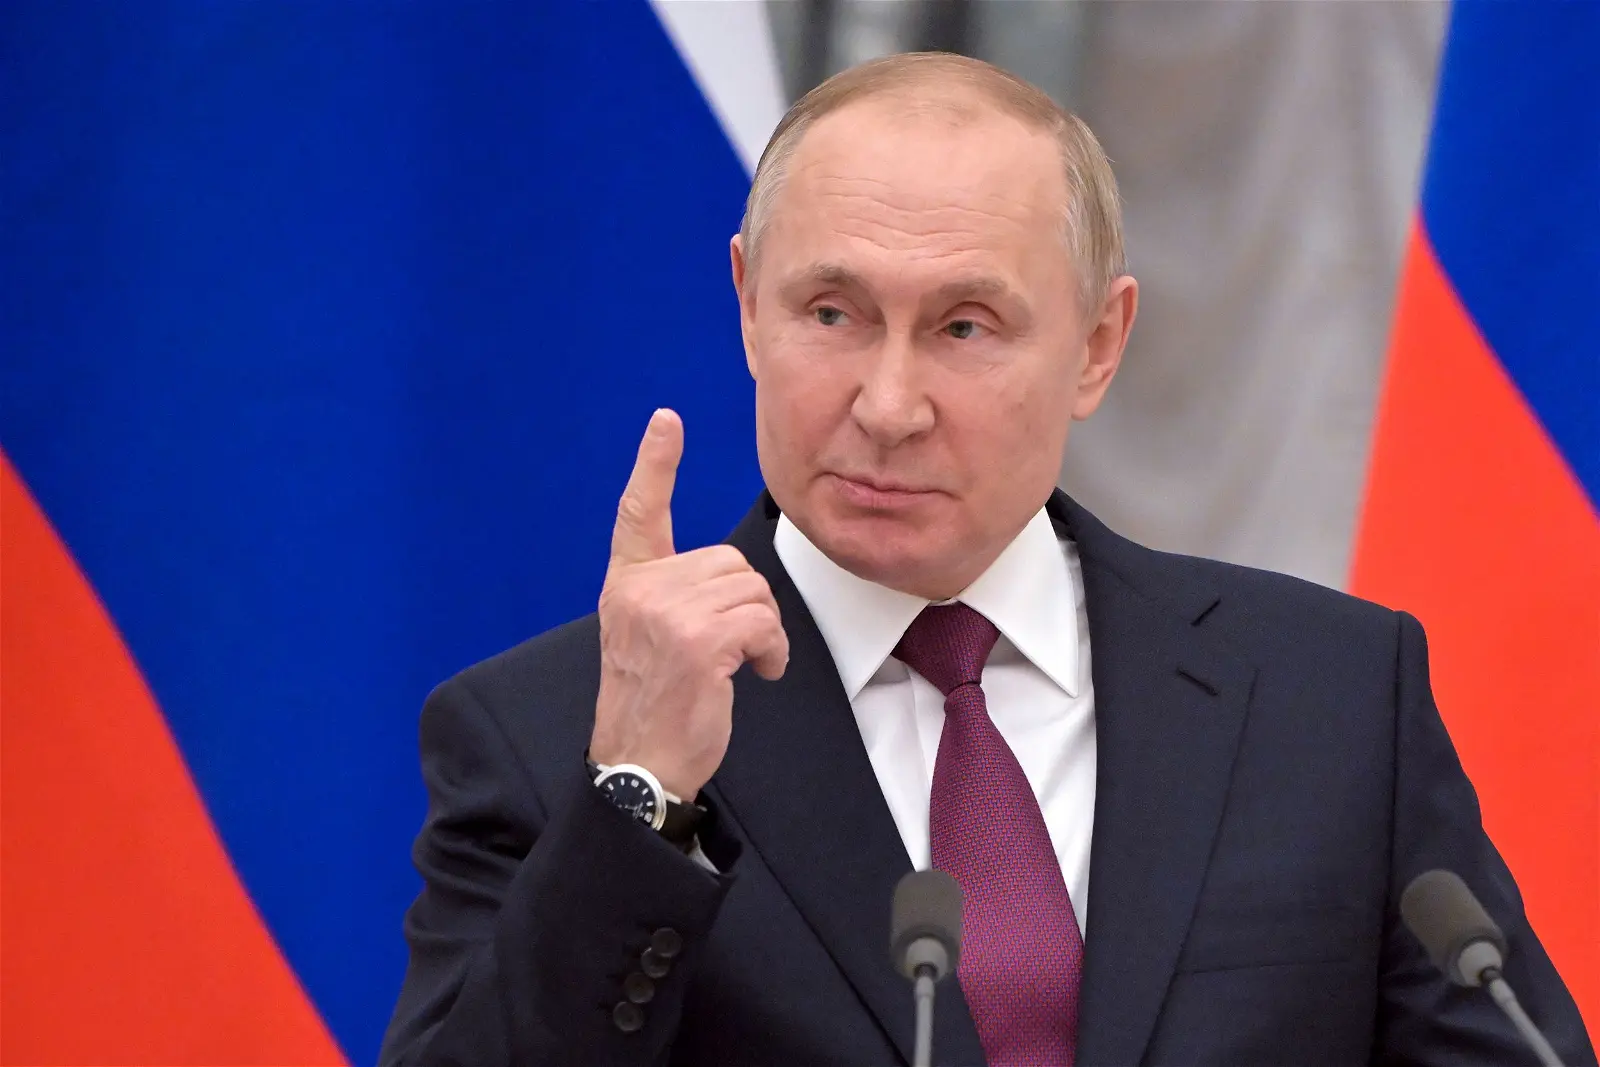 Breaking News: Putin formally registered as presidential candidate